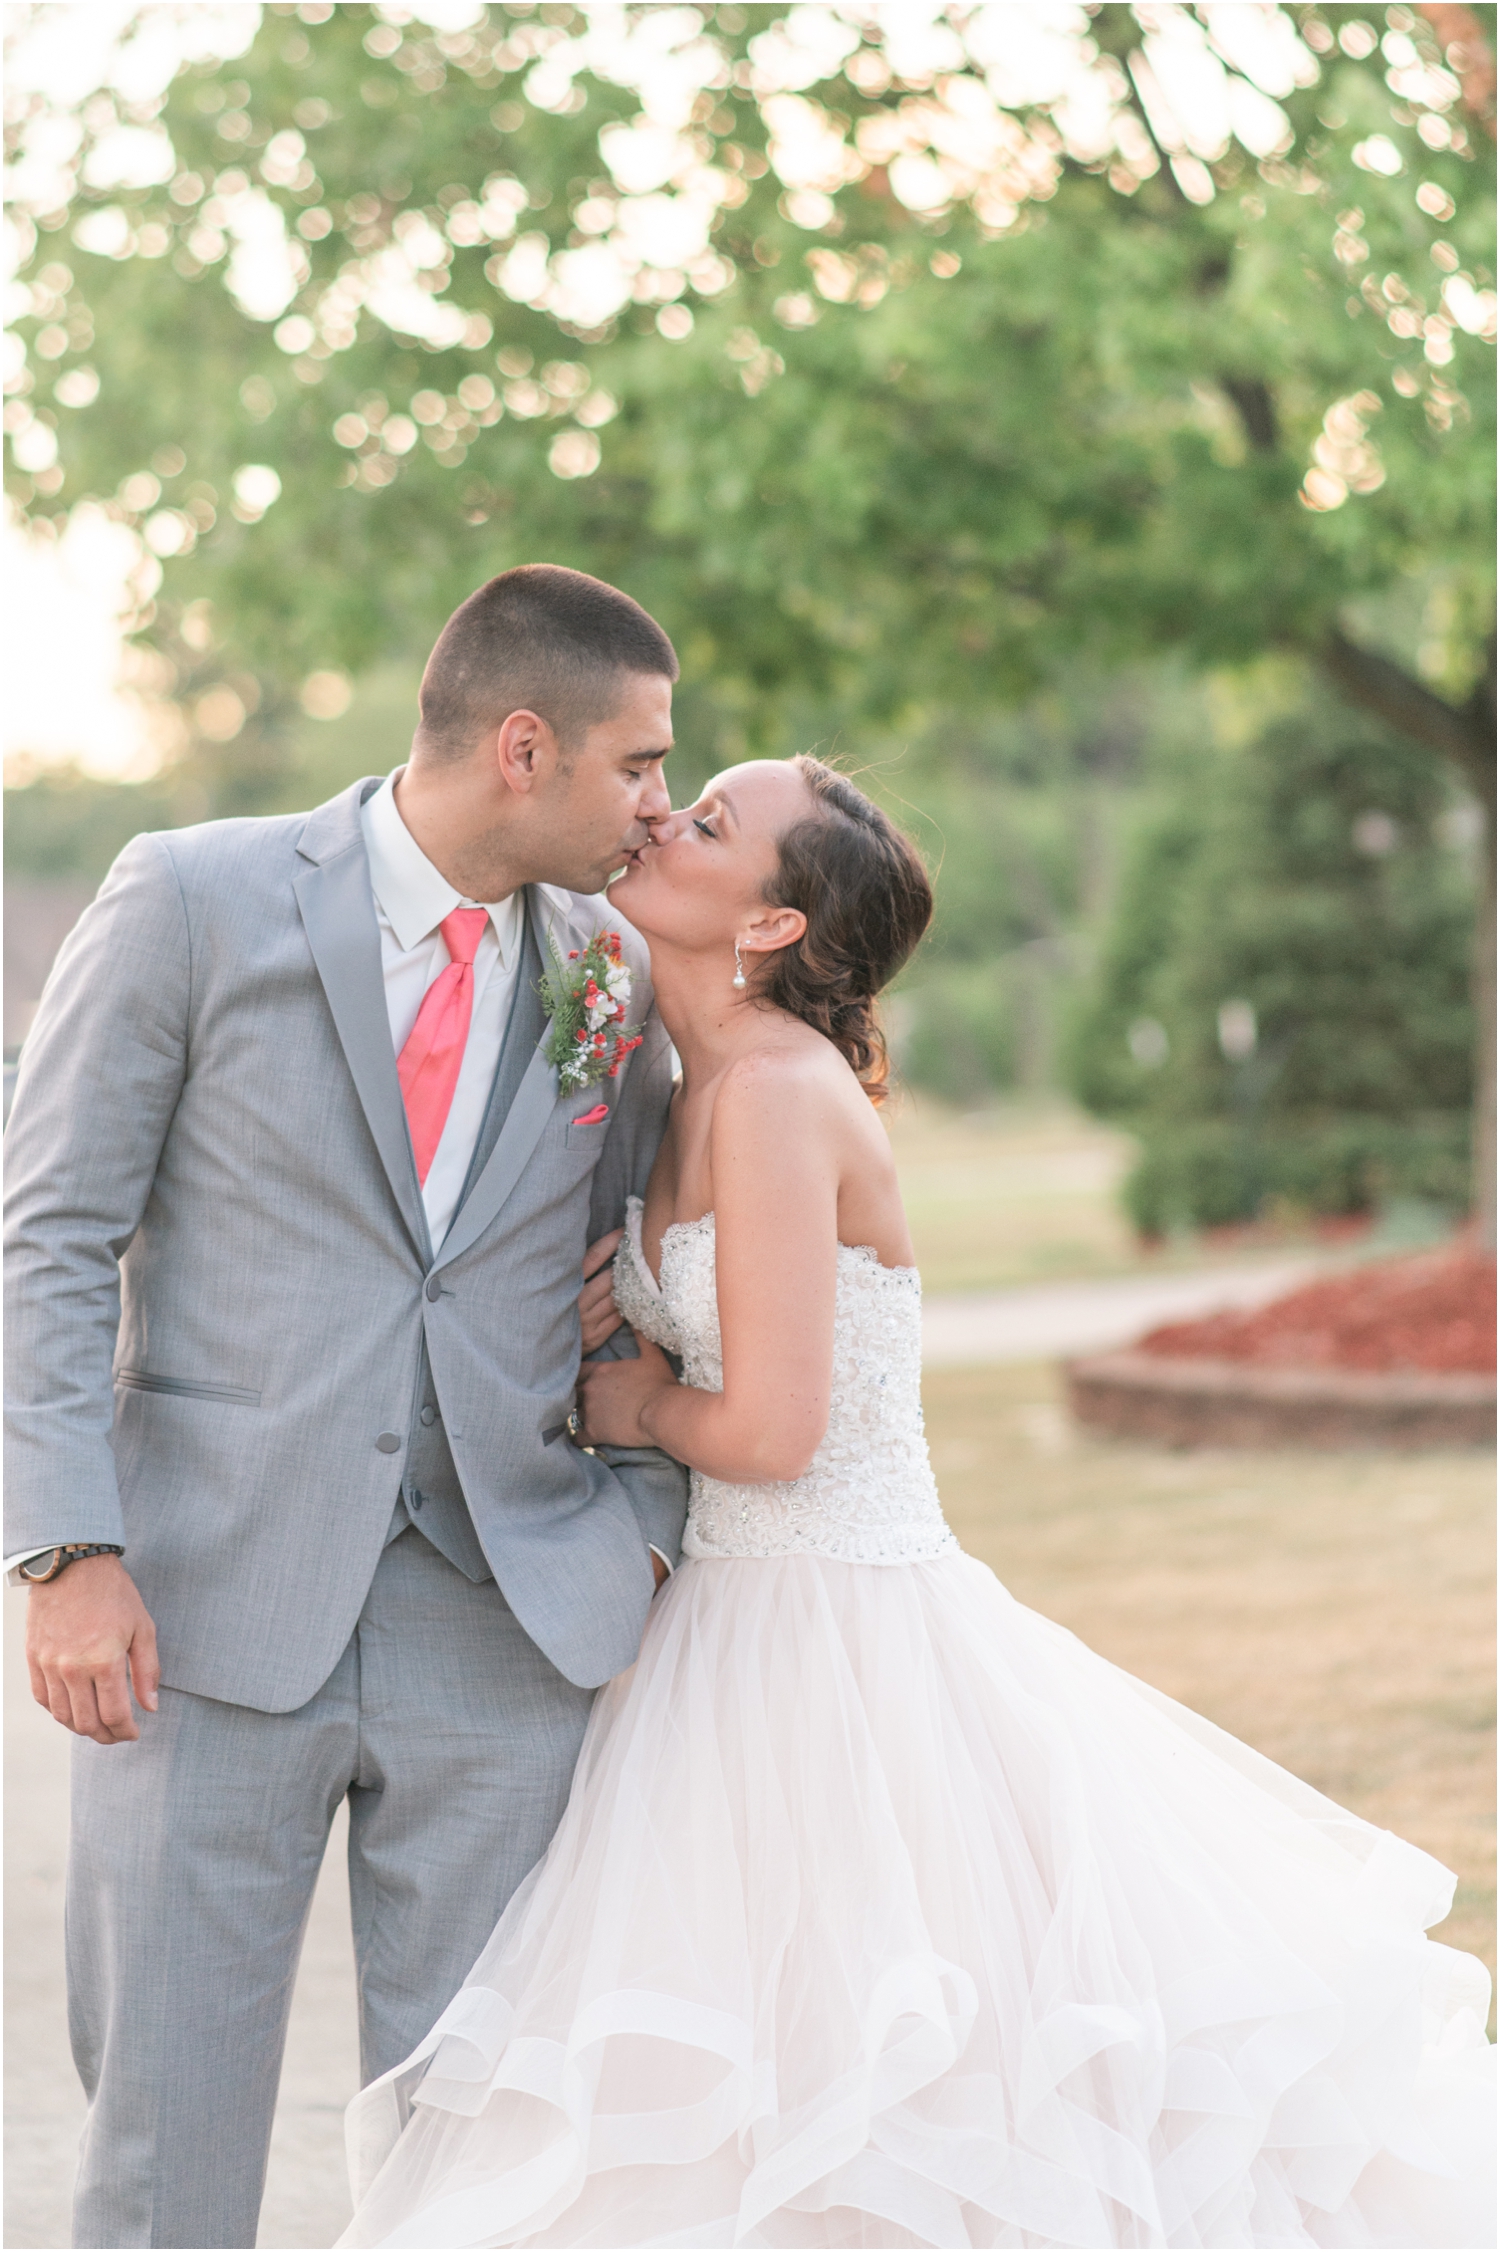 Bride and Groom Portraits Blush Wedding Gown Wedding Photography Grey and Coral Pink Wedding Intimate Foster Park Indiana Wedding Photographer Rose Courts Photography